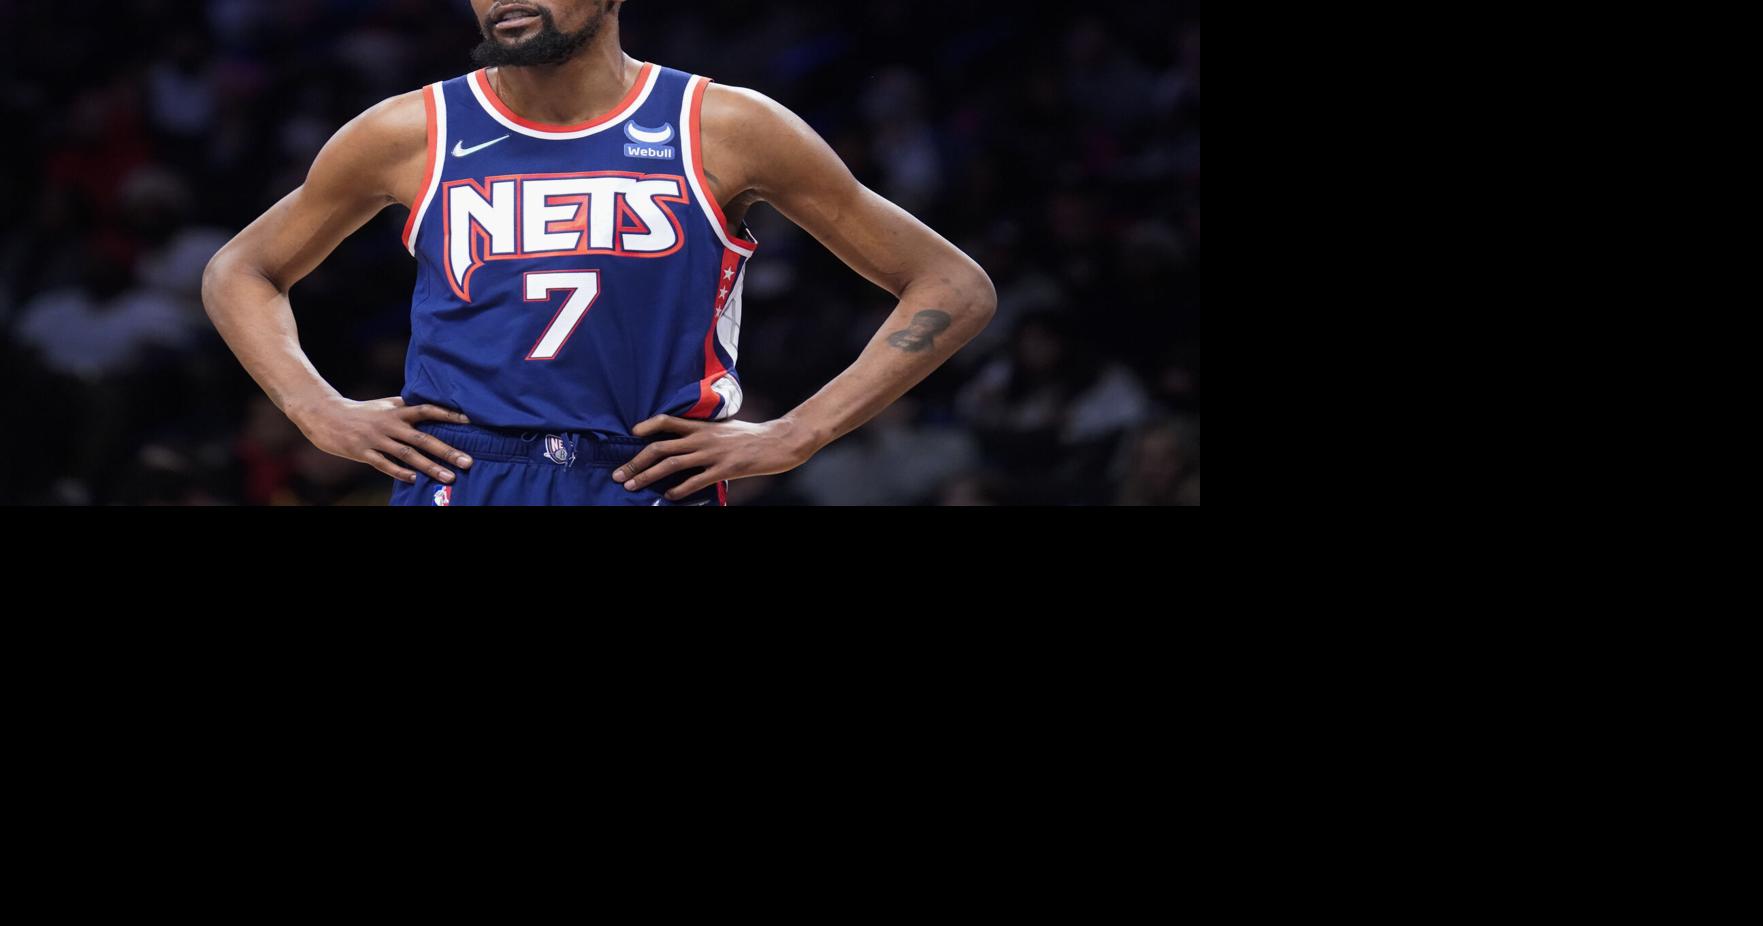 Brooklyn Nets land $30 million per year jersey deal with Webull